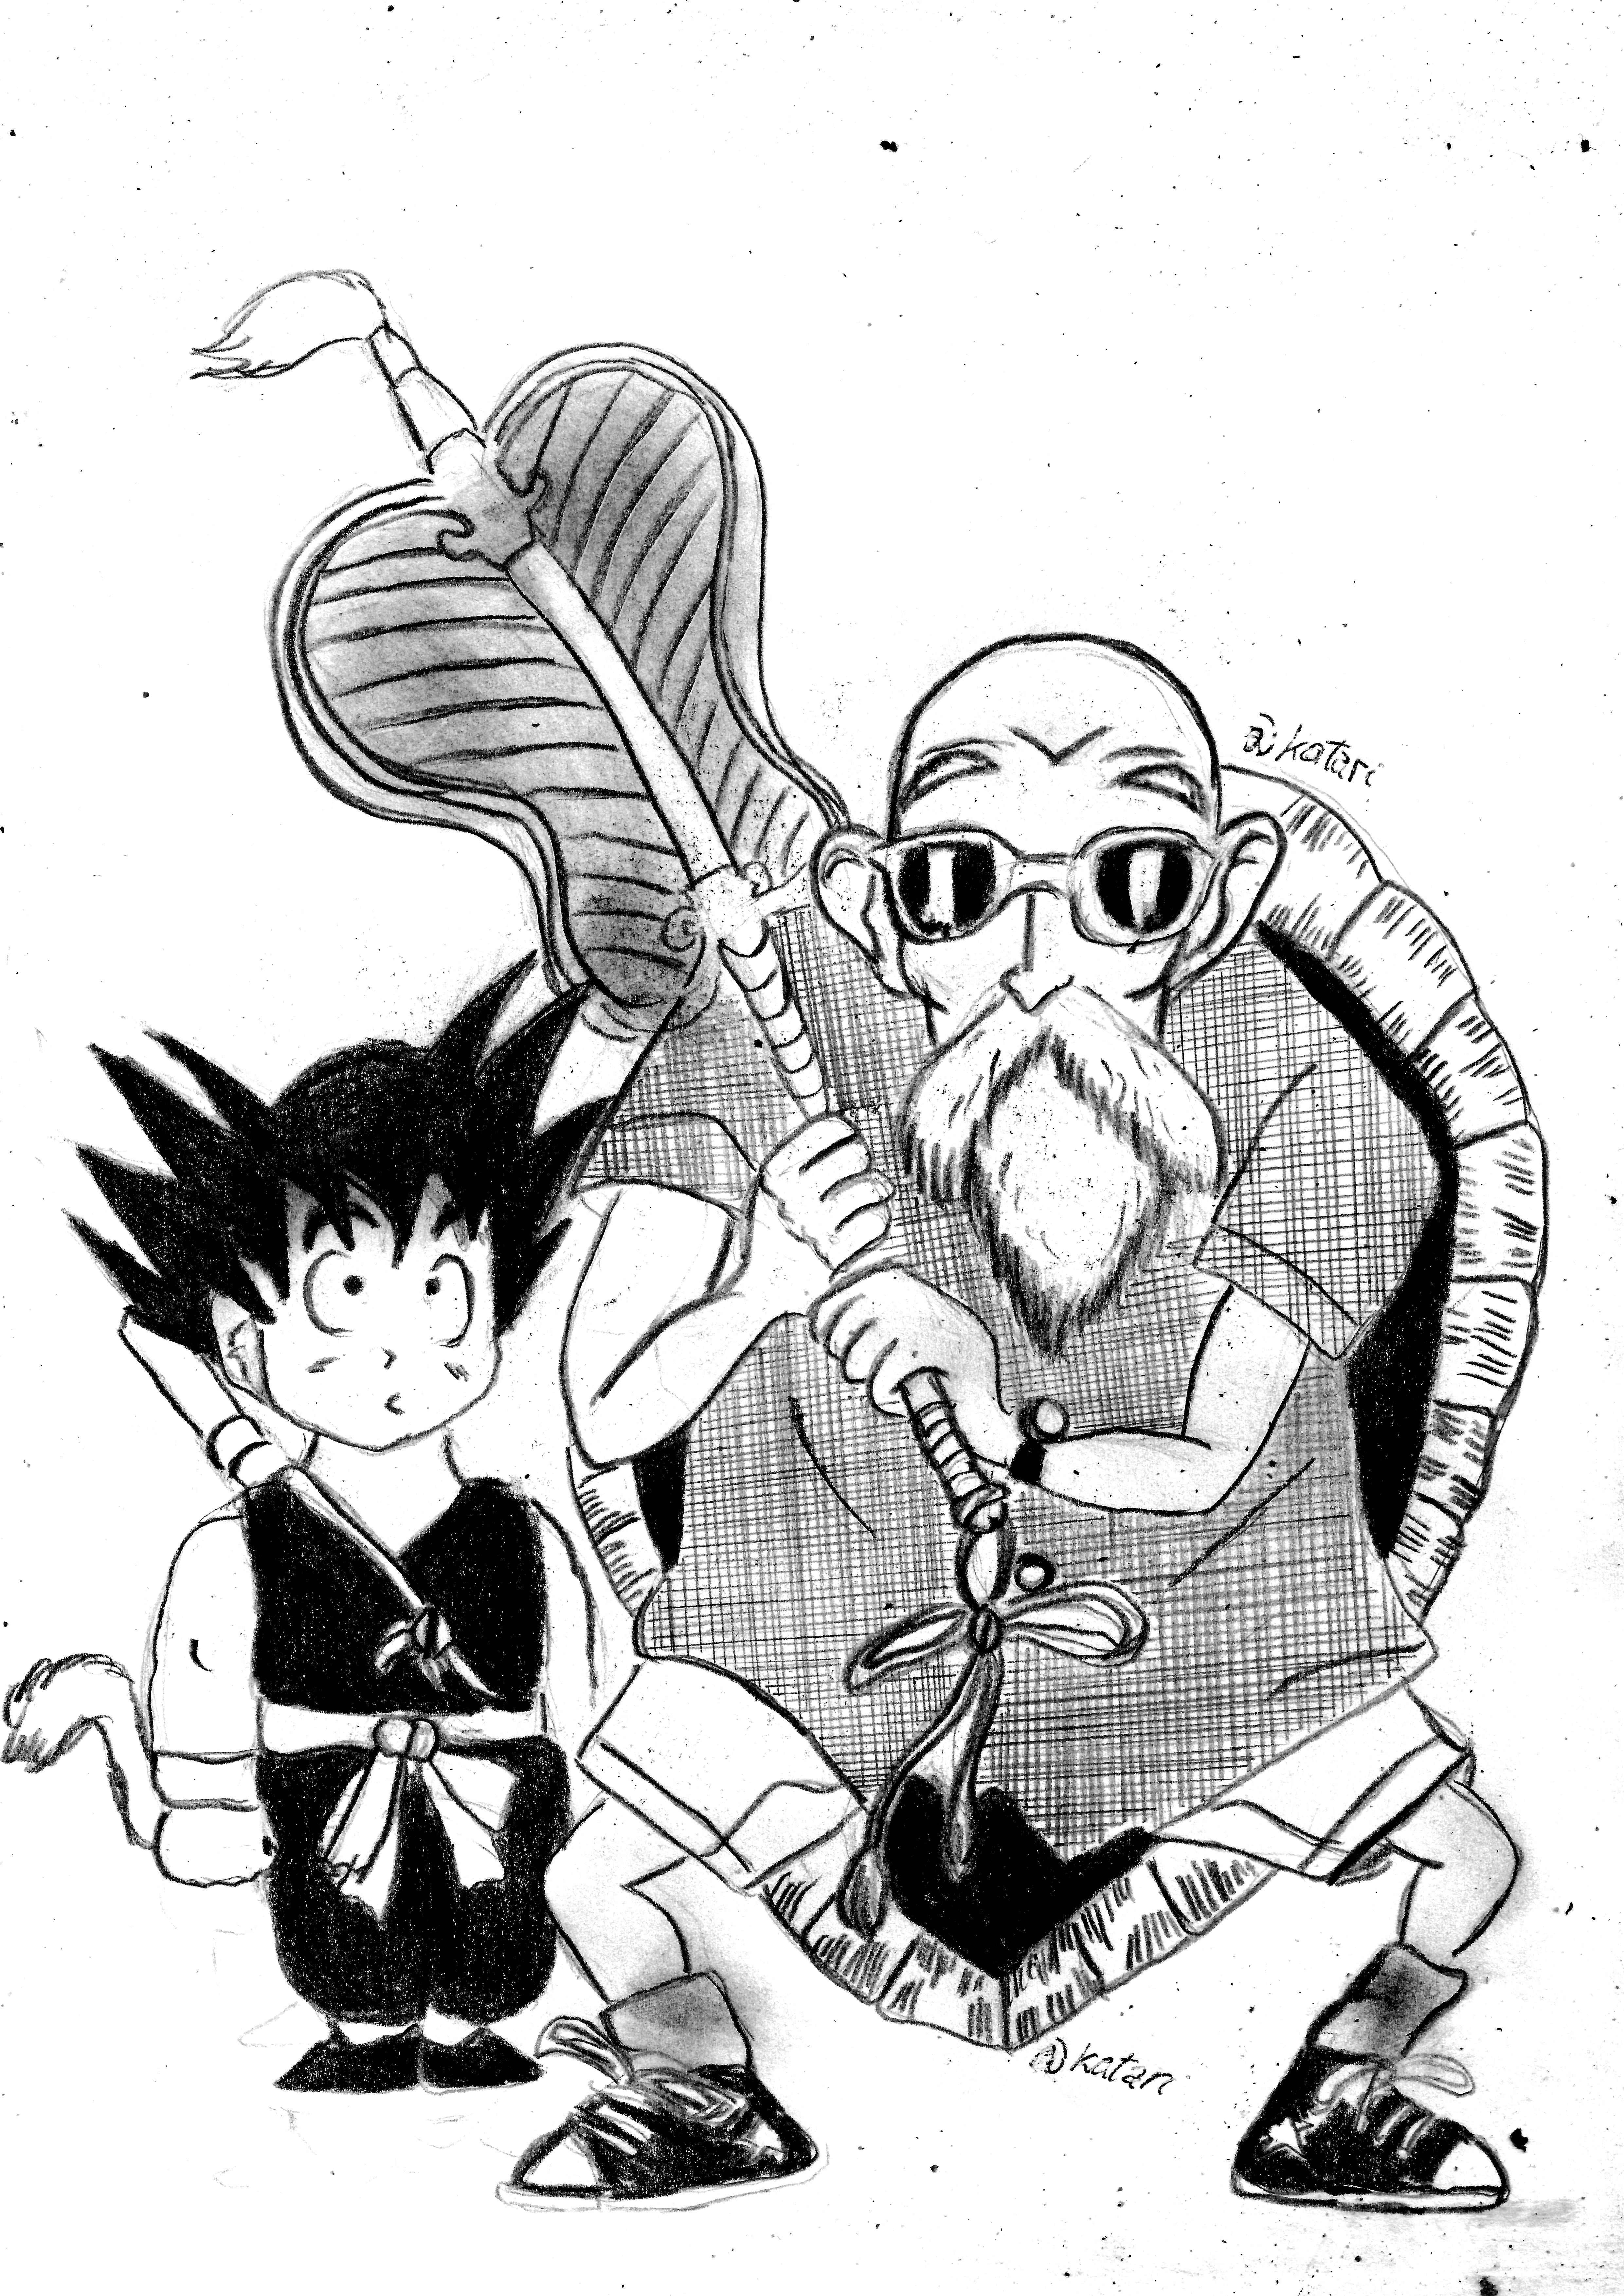 Discover 64+ master roshi sketch latest